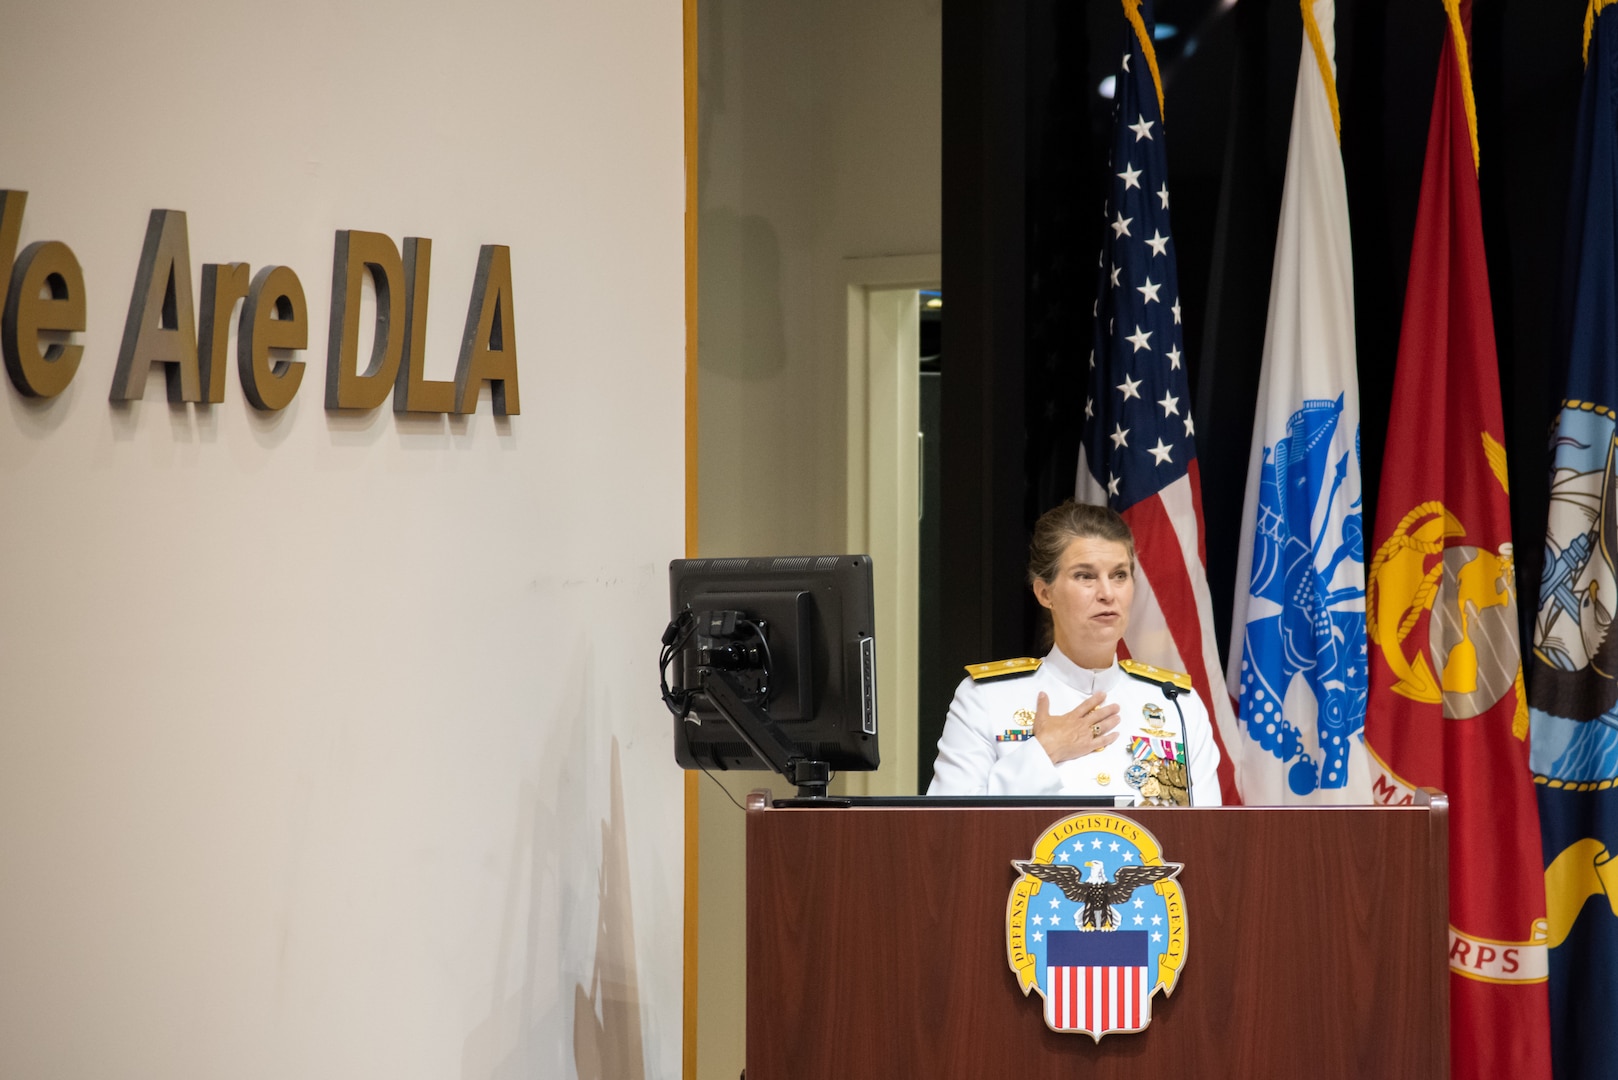 A woman with braided hair in a bun stands at a podium with a the US Flag and military flags in the background. She wears a pure white Navy uniform with gold trim and many medals and badges.